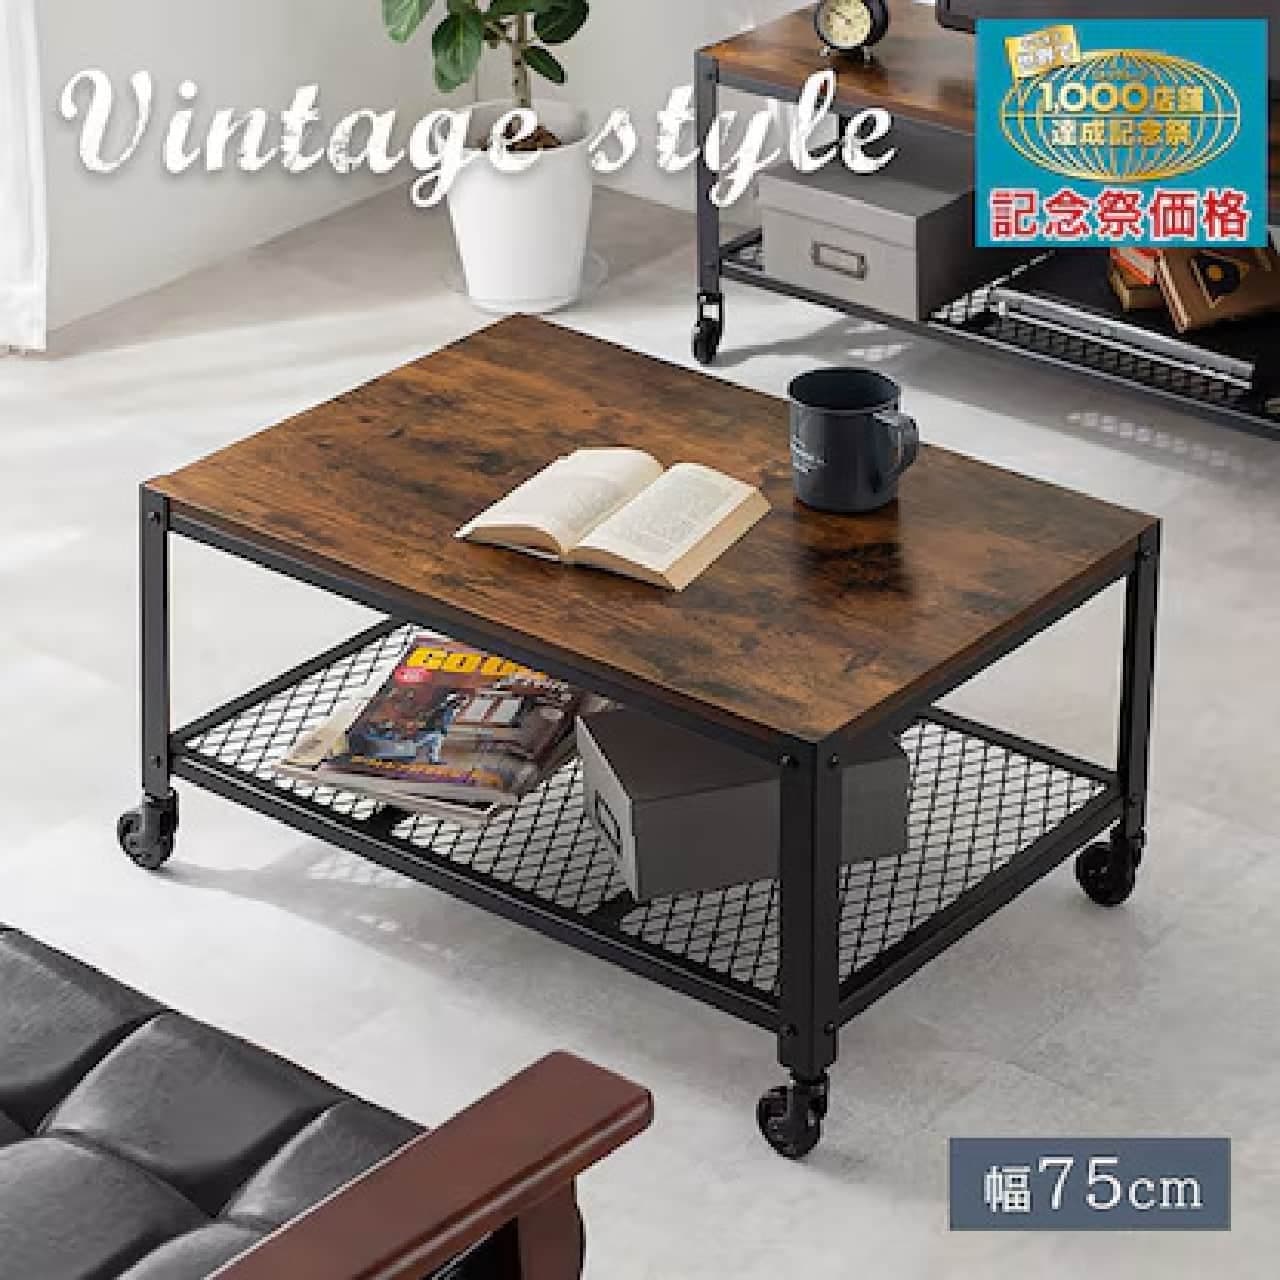 Vintage style center table (width 75)